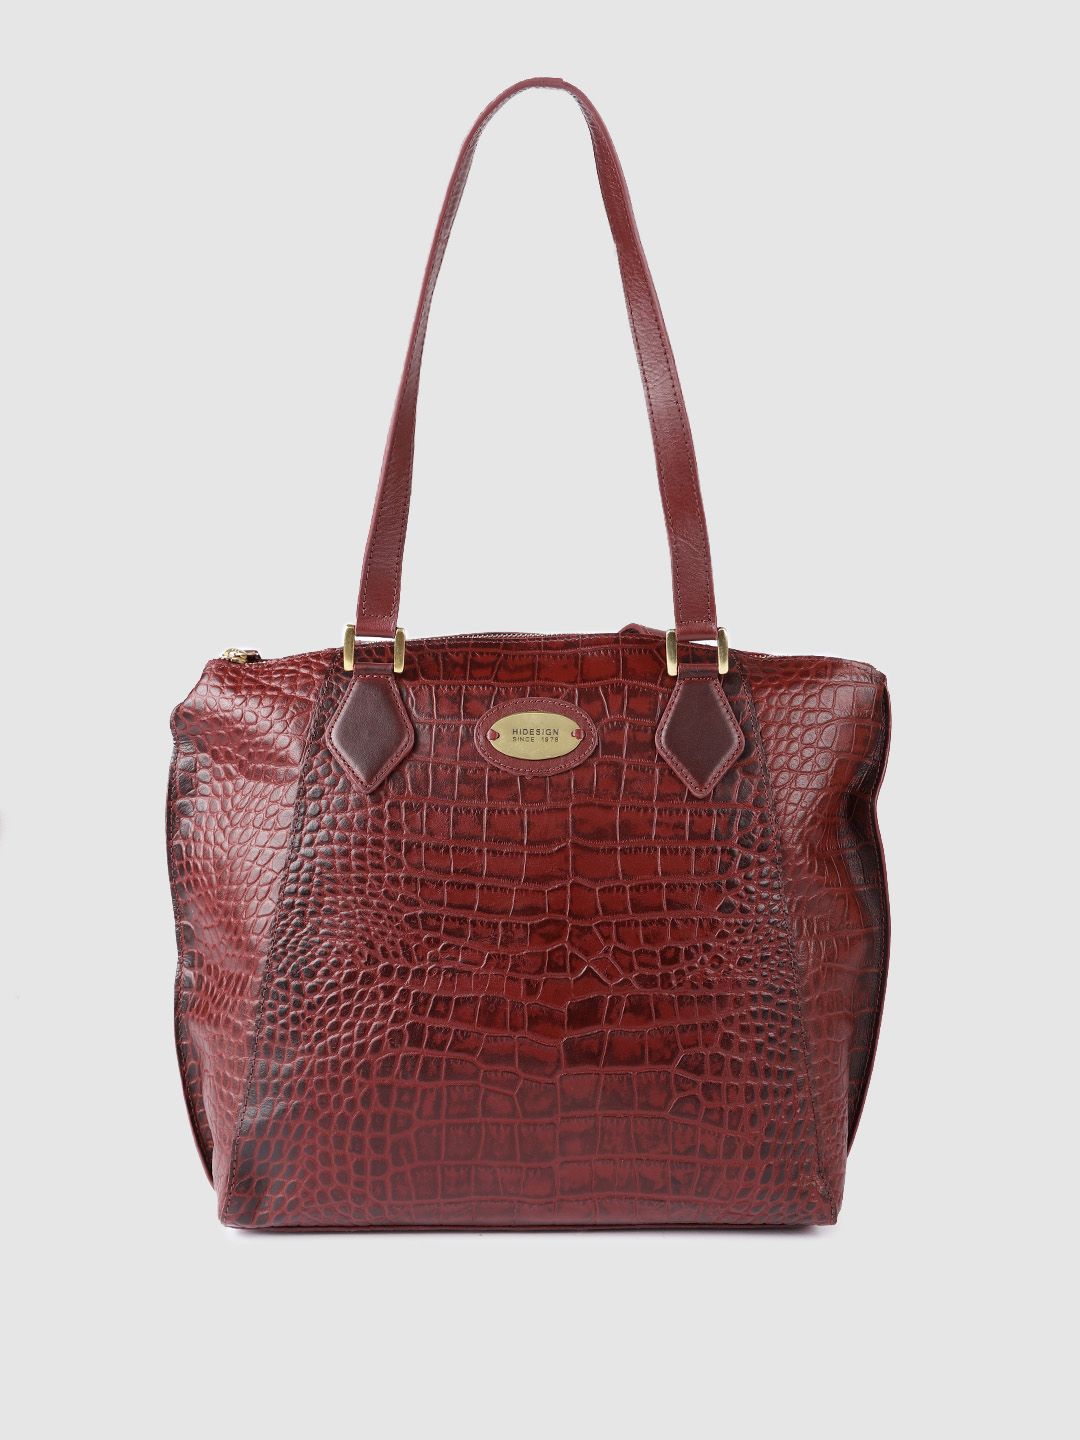 Hidesign Maroon Animal Textured Leather Structured Shoulder Bag Price in India